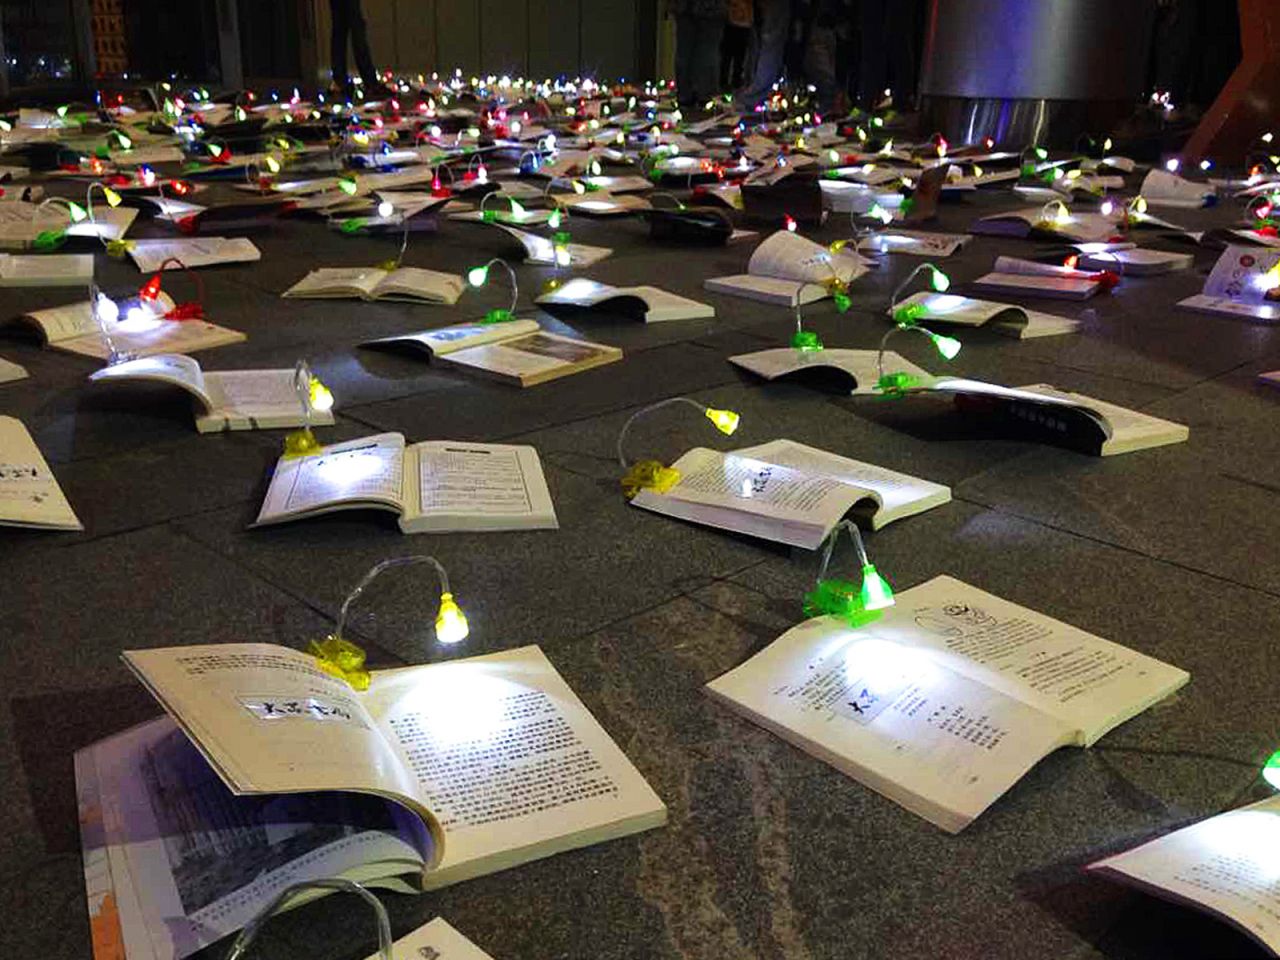 It's not the first time Popular Bookmall has employed inventive tactics to promote reading. Last year, the company laid out 1,000 books and reading lamps on the ground and encouraged people "to go on a date" with a book.